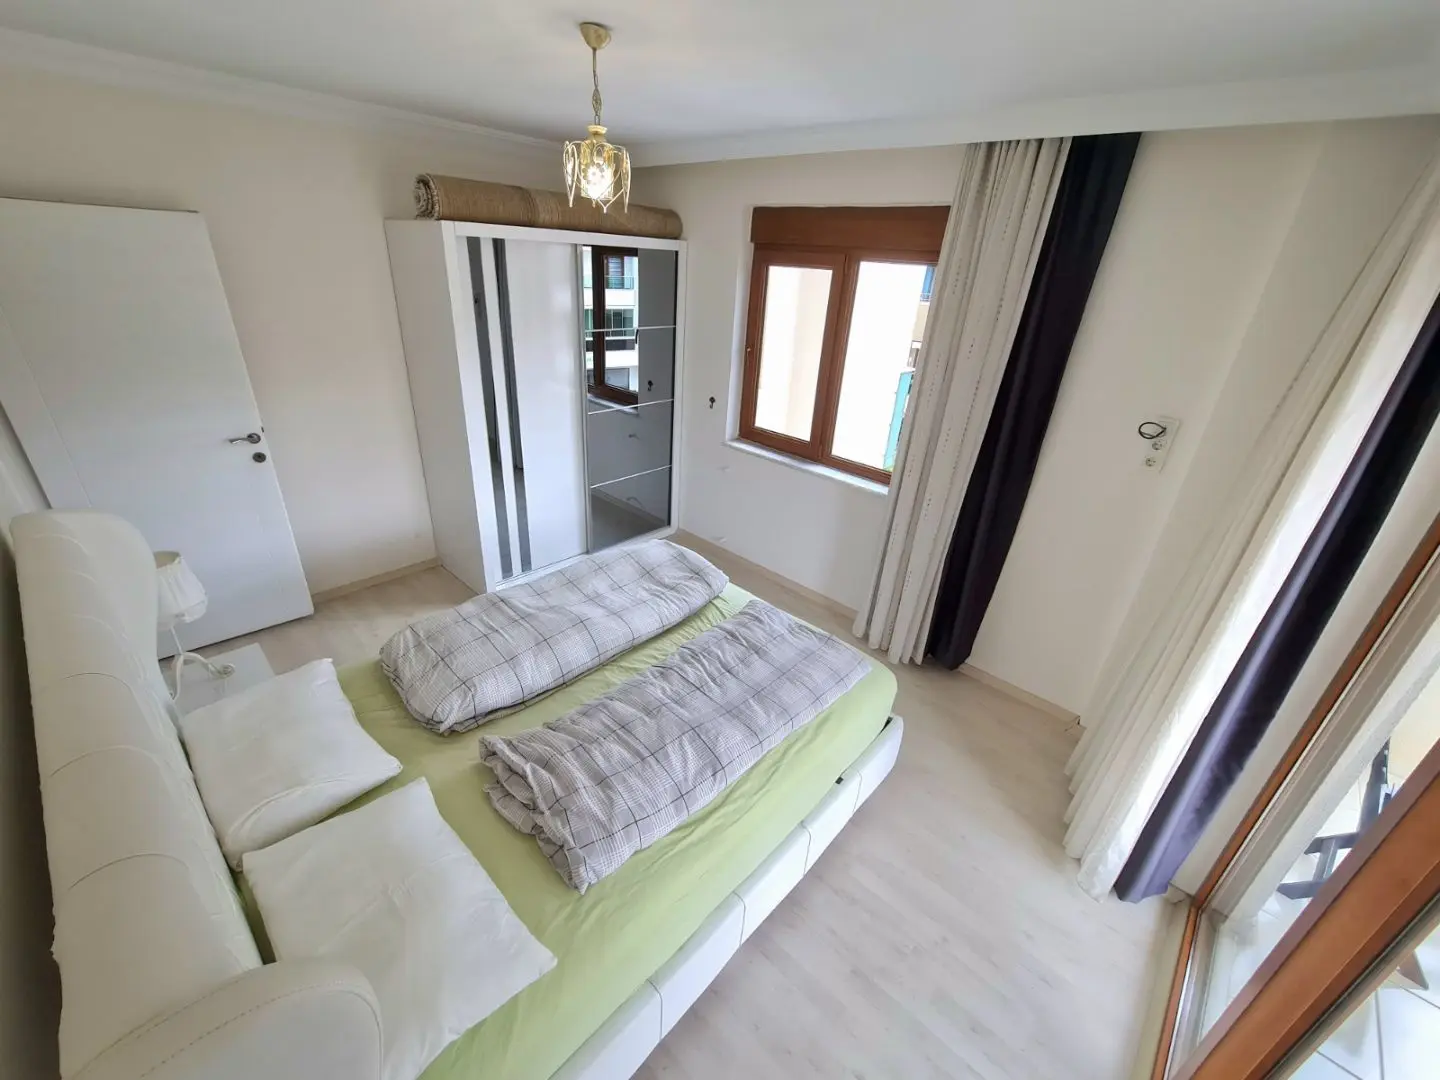 FULLY FURNISHED SPACIOUS 2+1 APARTMENT IN ALANYA, OBA